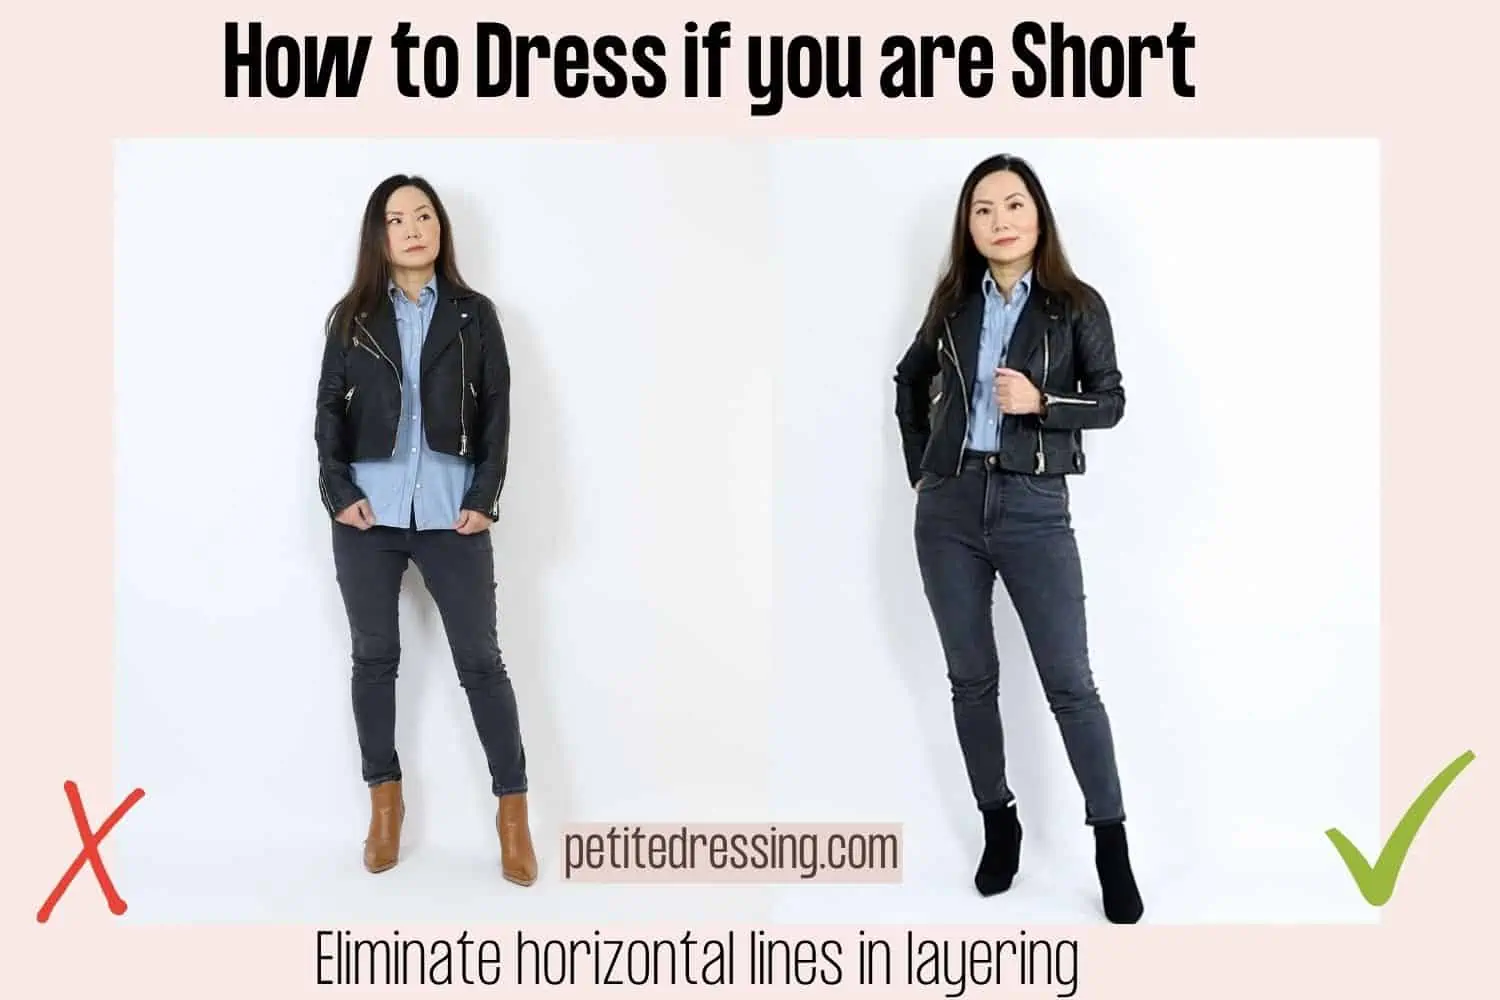 Most Flattering Outfit Ideas For Petite Girls Under 5'3 - Society19 UK